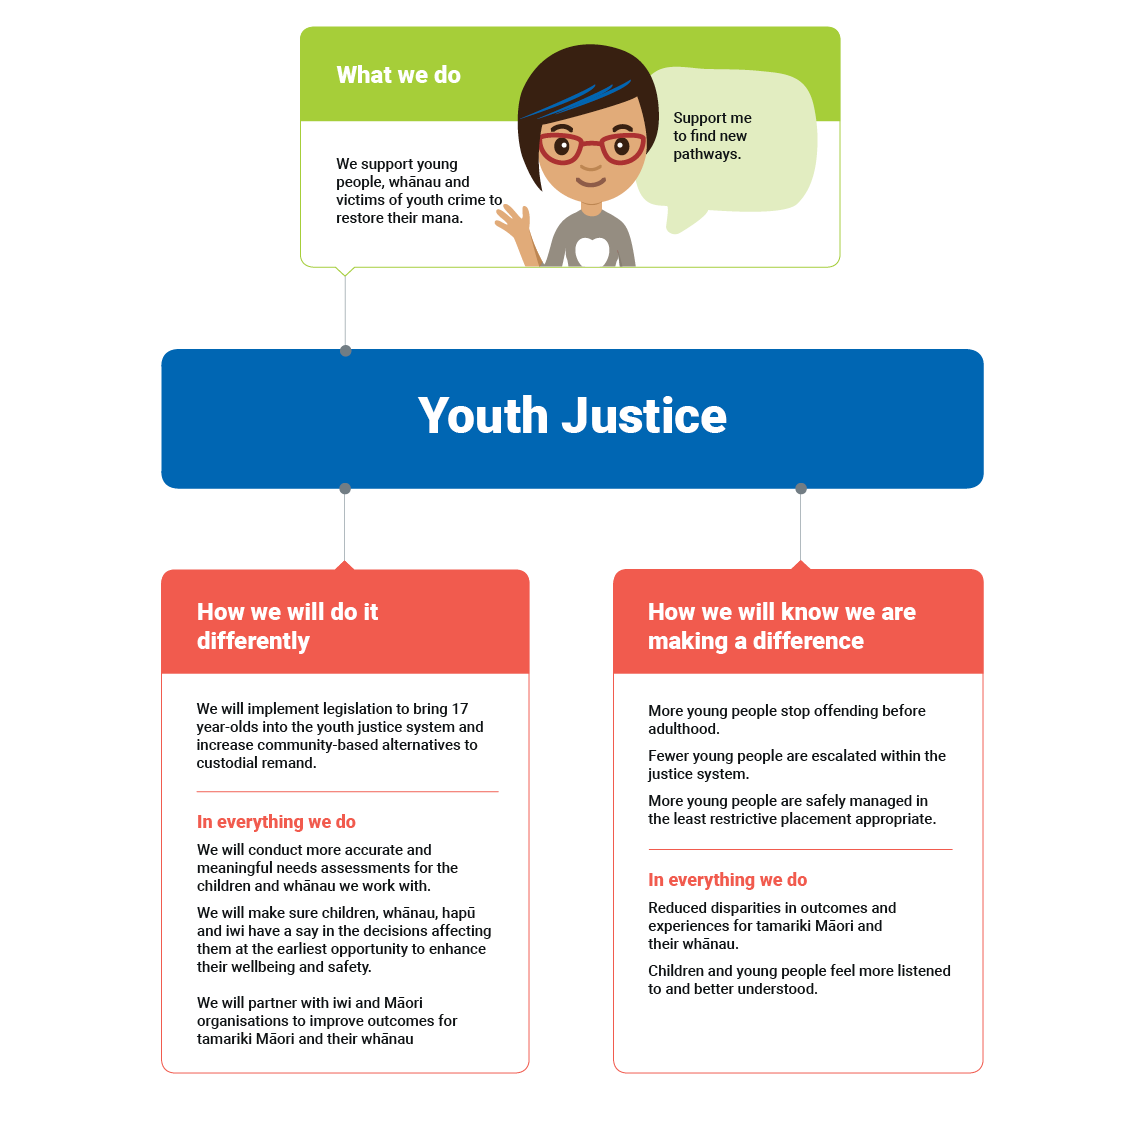 Youth justice image